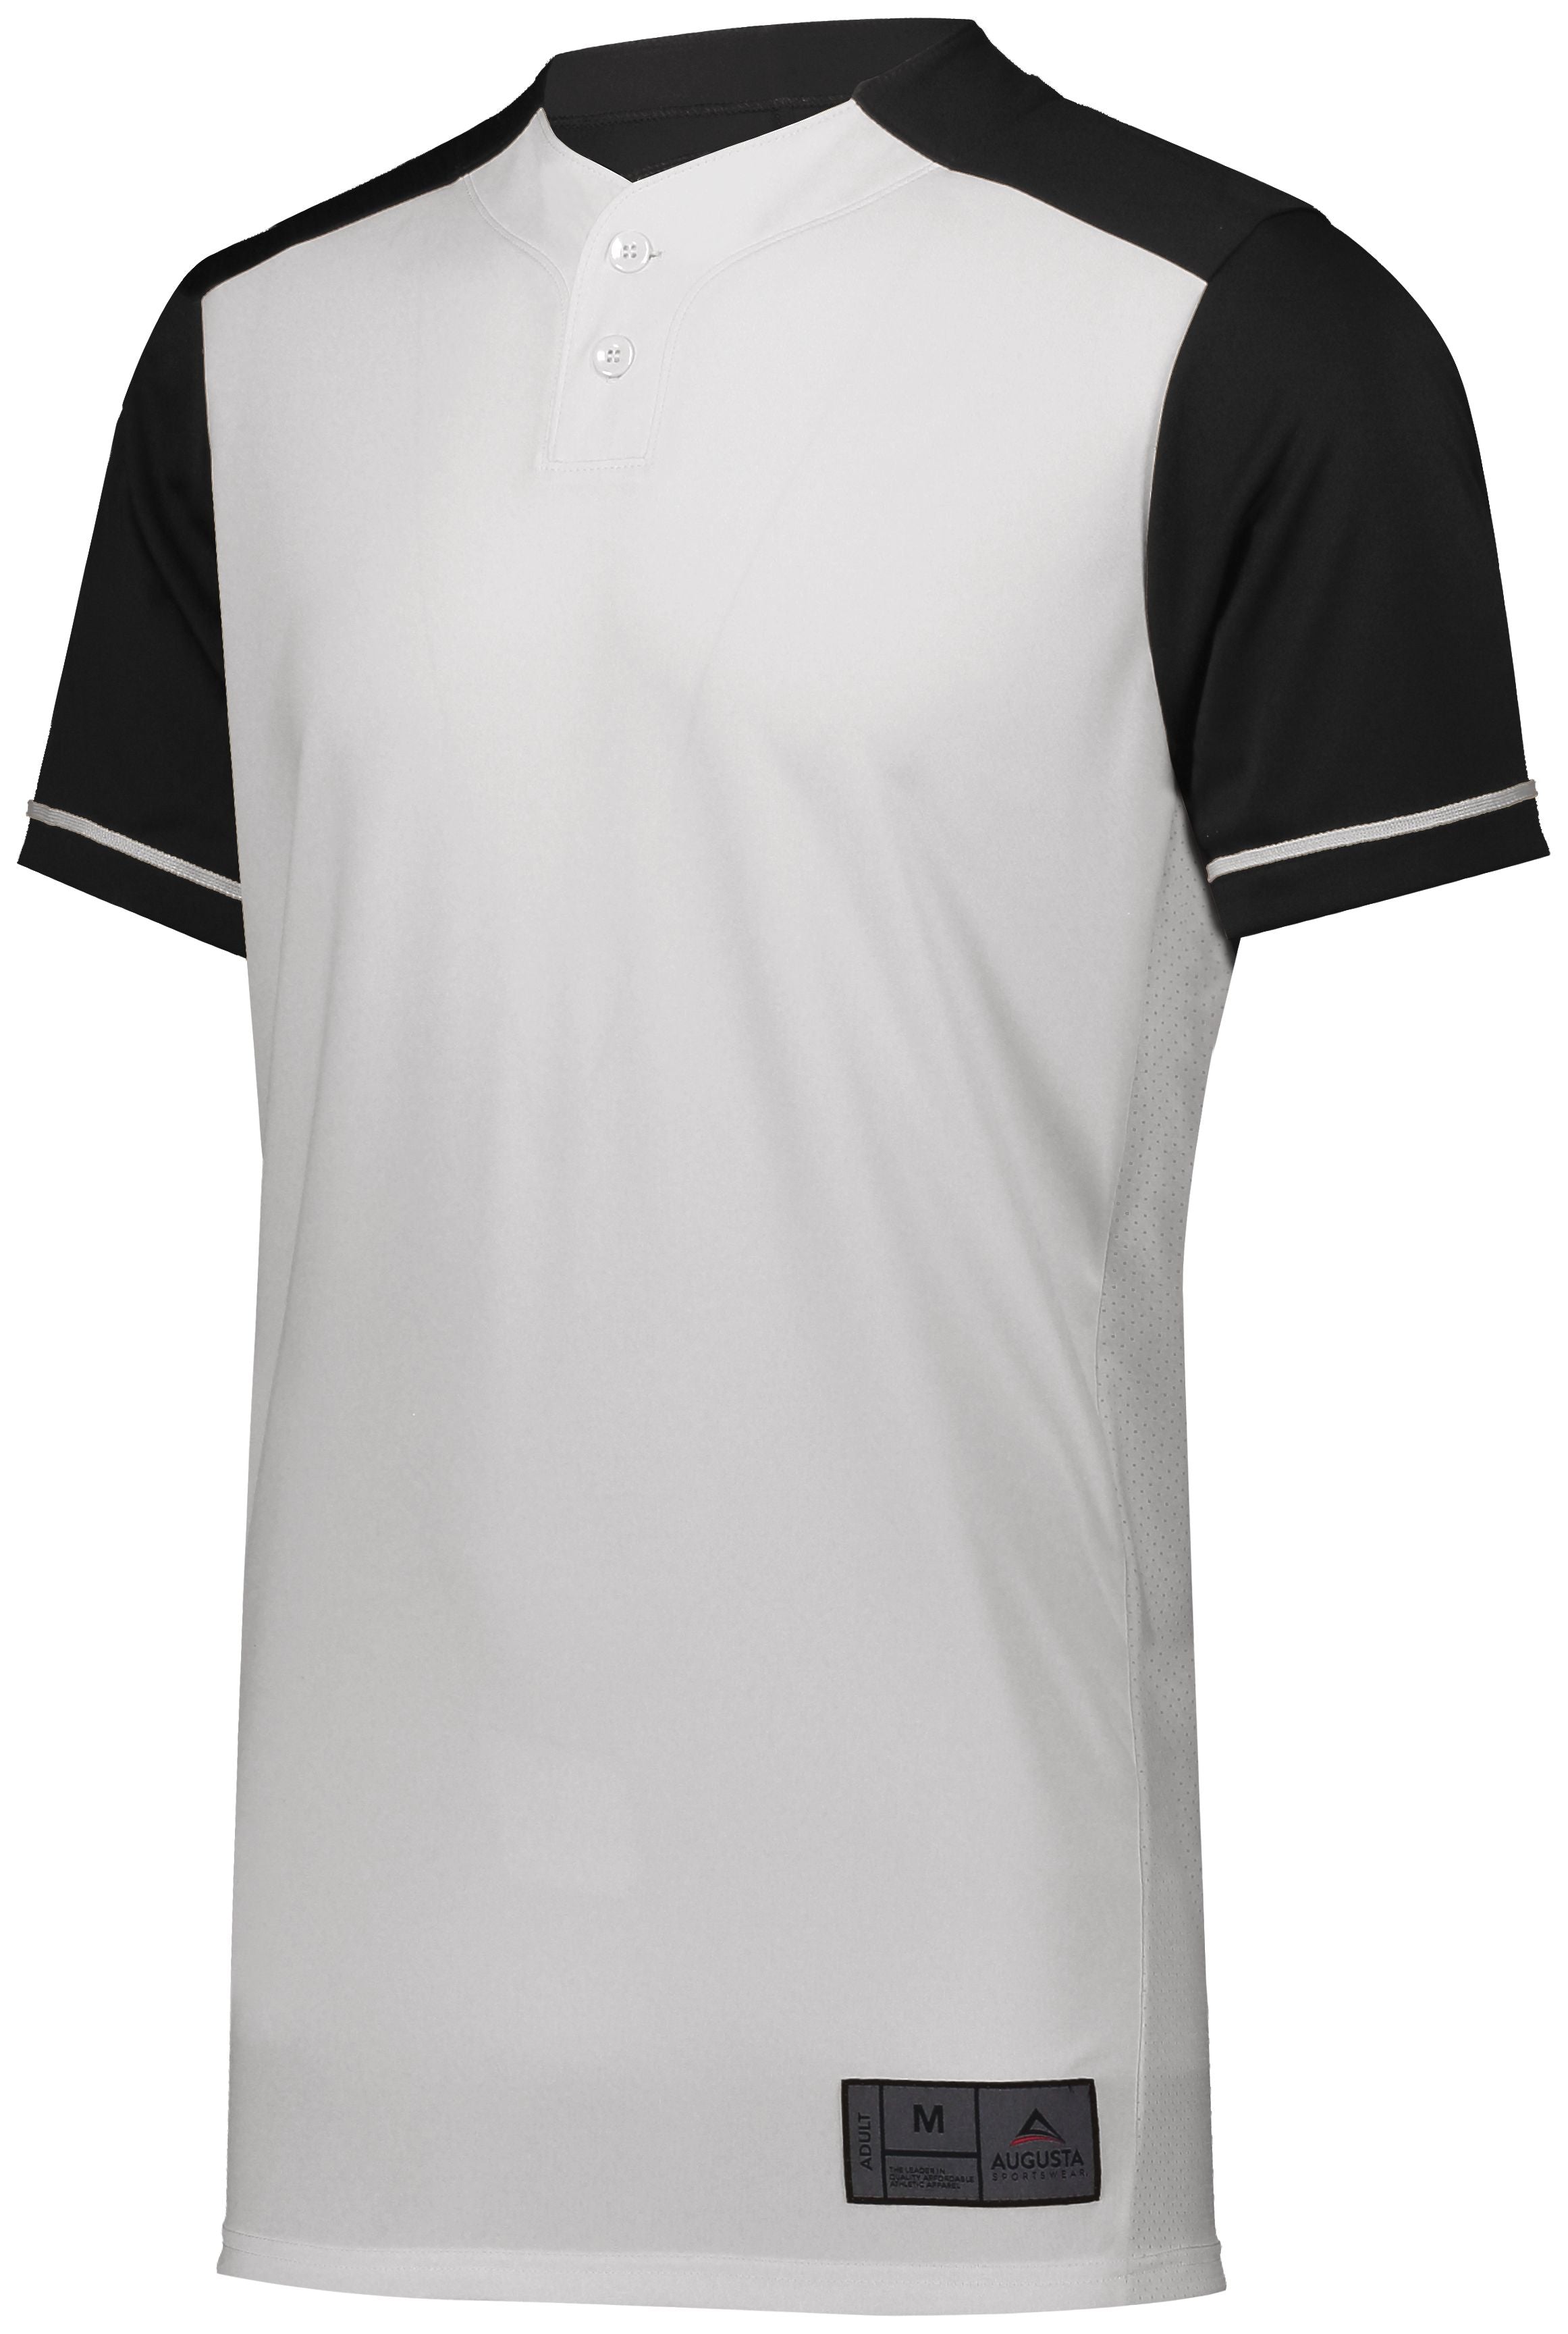 Augusta Sportswear Youth Closer Jersey in White/Black  -Part of the Youth, Youth-Jersey, Augusta-Products, Baseball, Shirts, All-Sports, All-Sports-1 product lines at KanaleyCreations.com